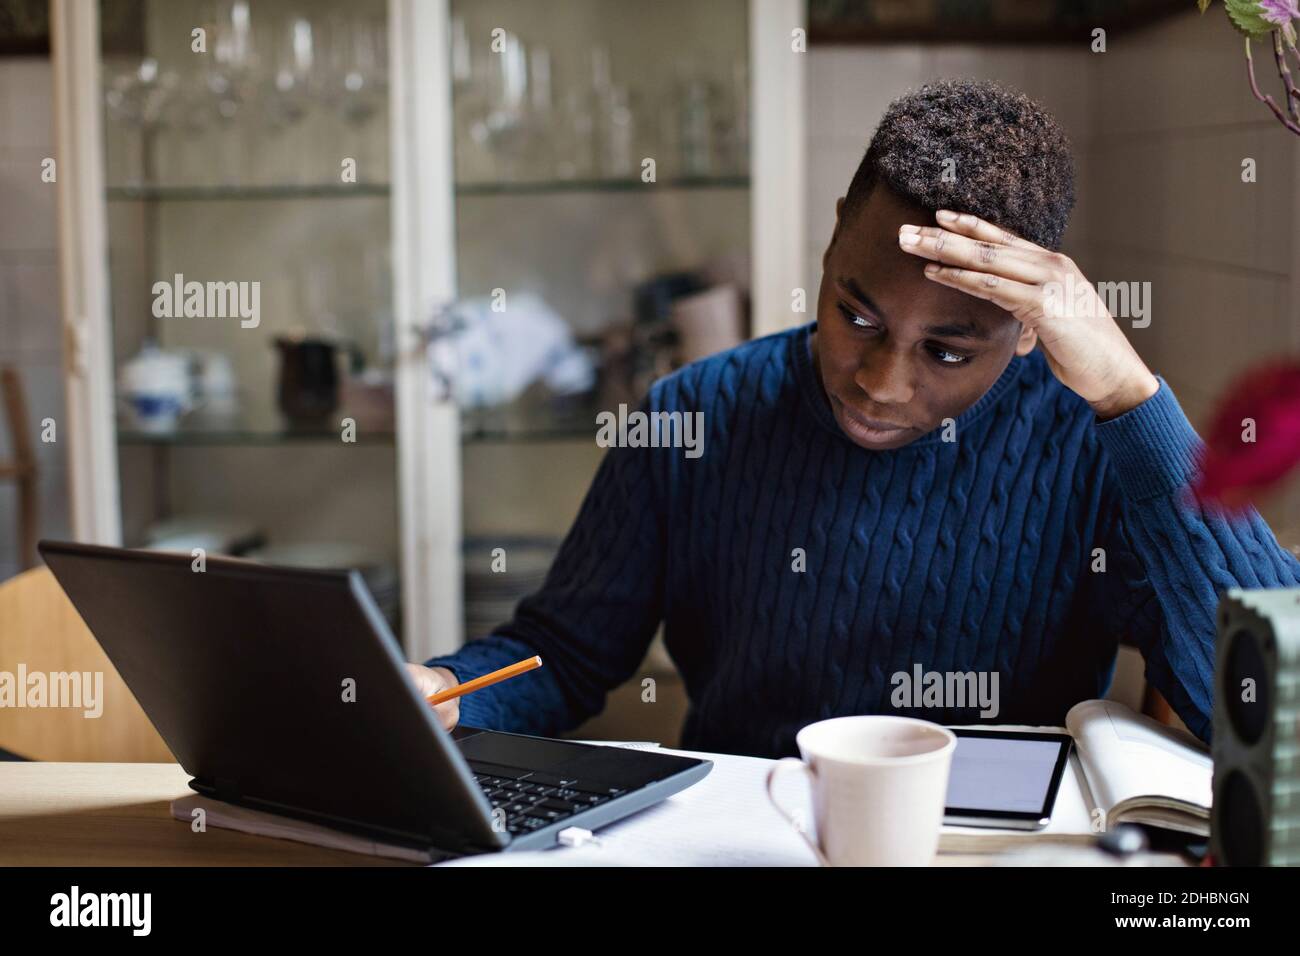 Worried teenage boy looking at laptop while doing homework on table Stock Photo